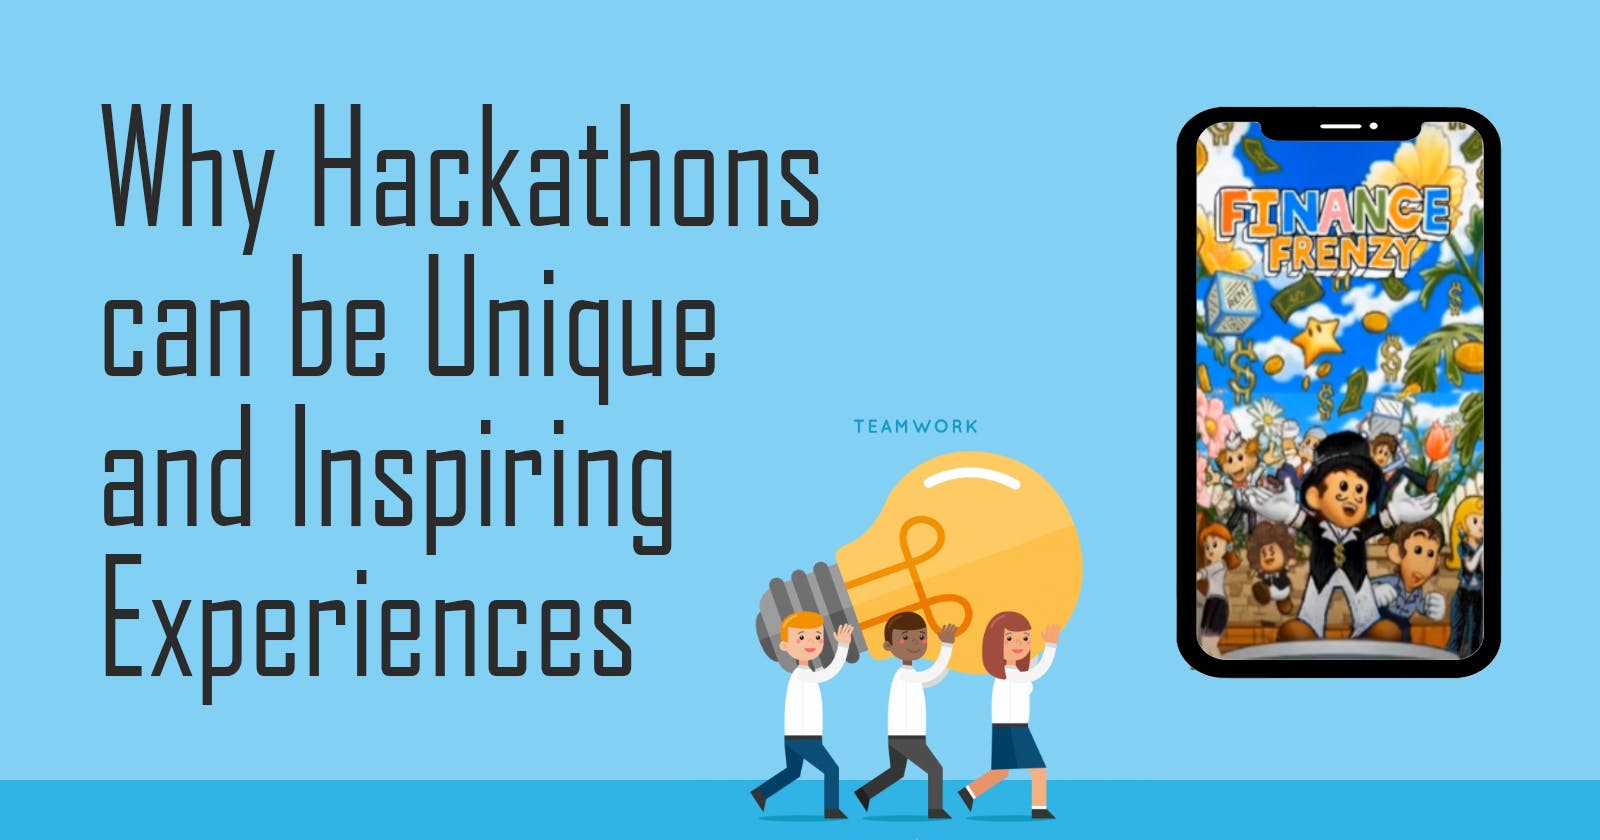 Finance Frenzy: A Truly Unique Hackathon Experience